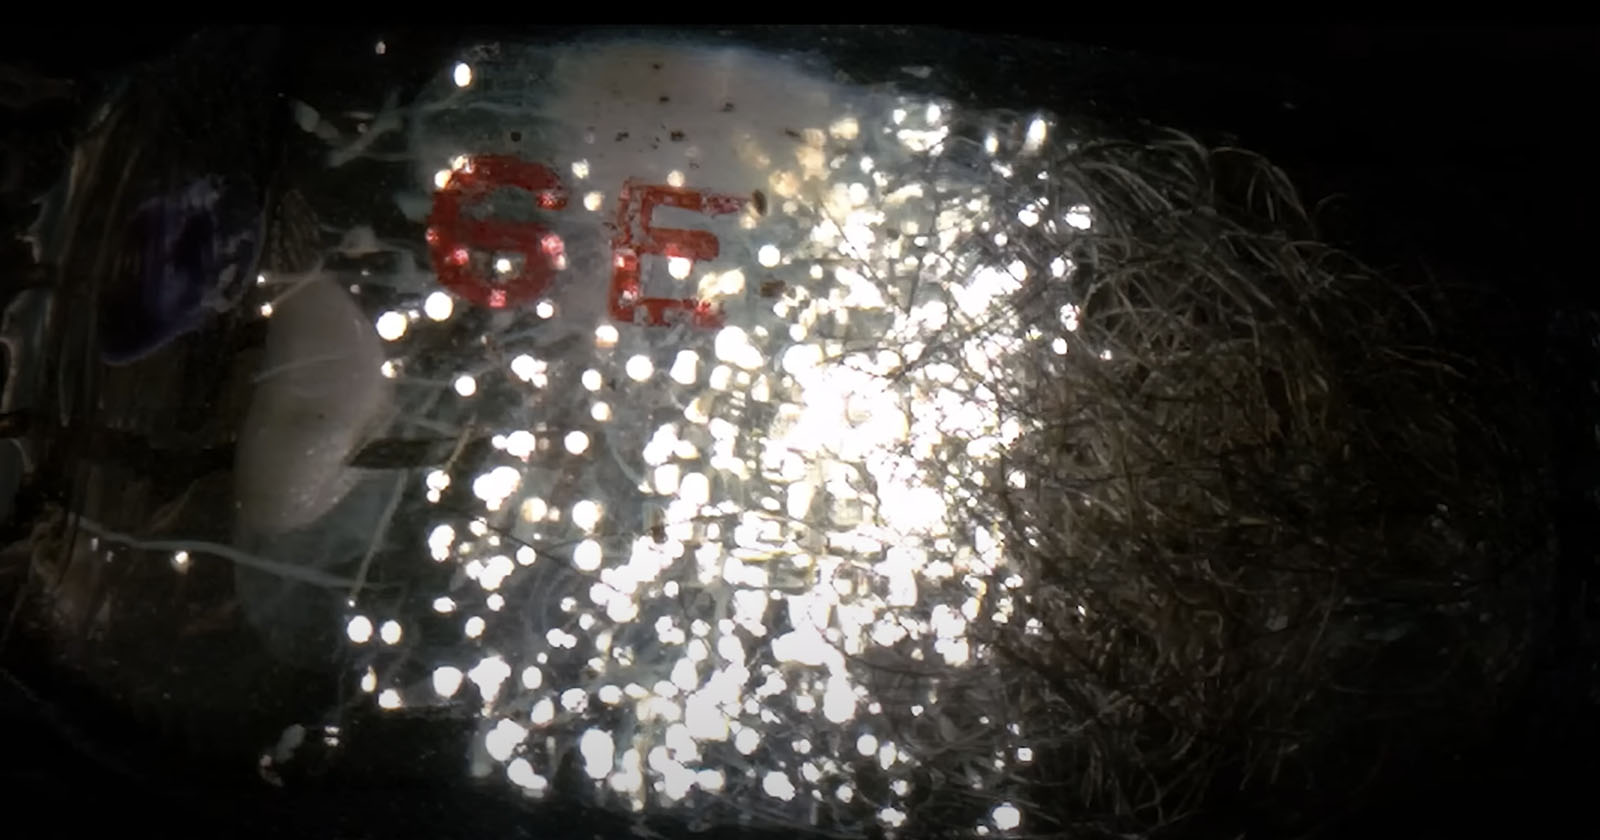 Watch Old-School Single-Use Flash Bulbs Explode in Slow-Mo